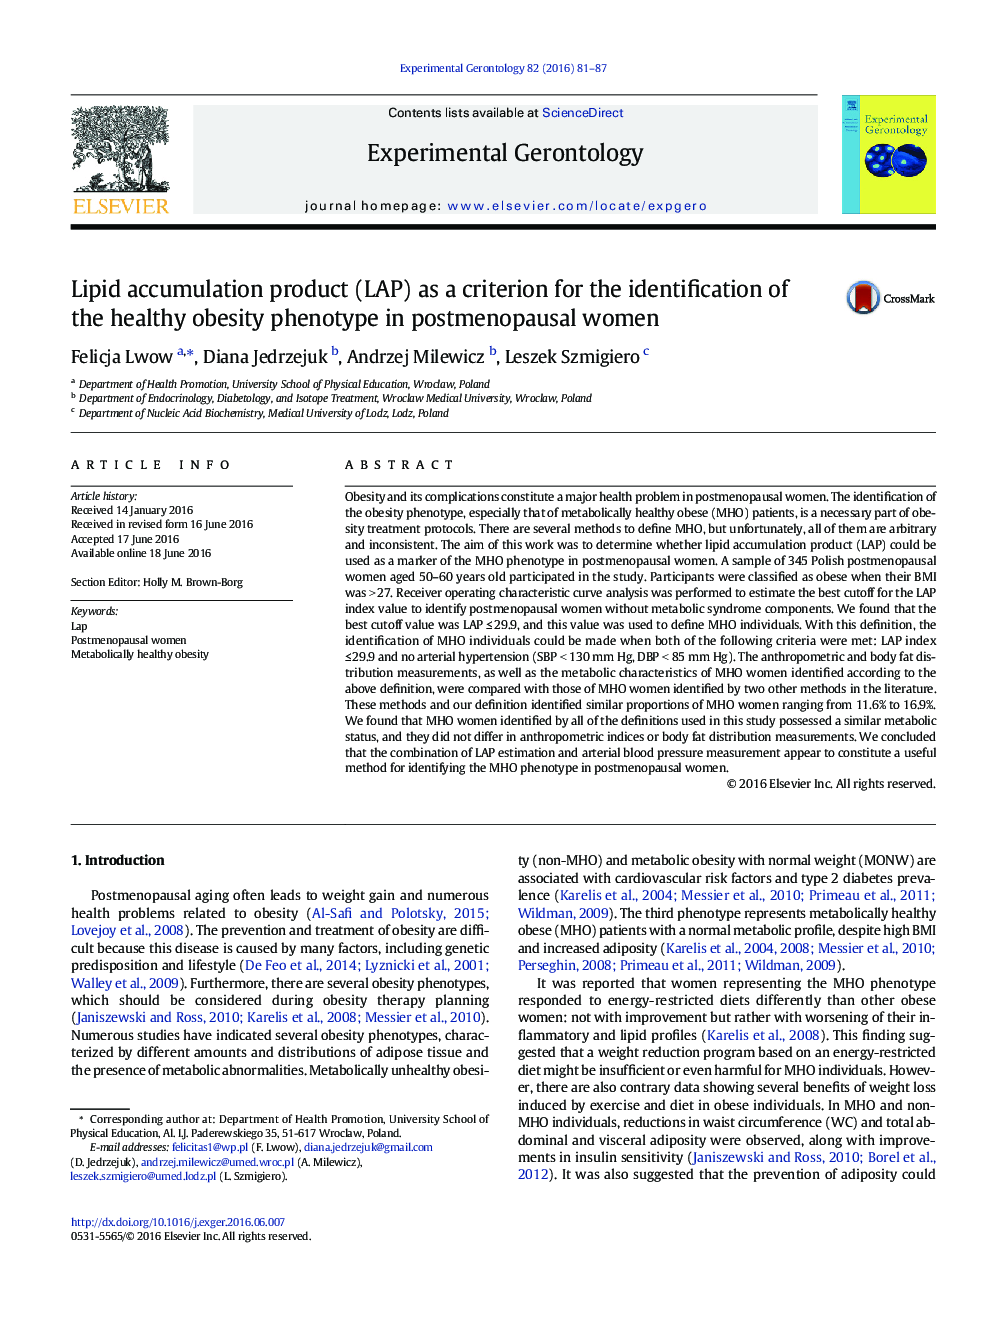 Lipid accumulation product (LAP) as a criterion for the identification of the healthy obesity phenotype in postmenopausal women